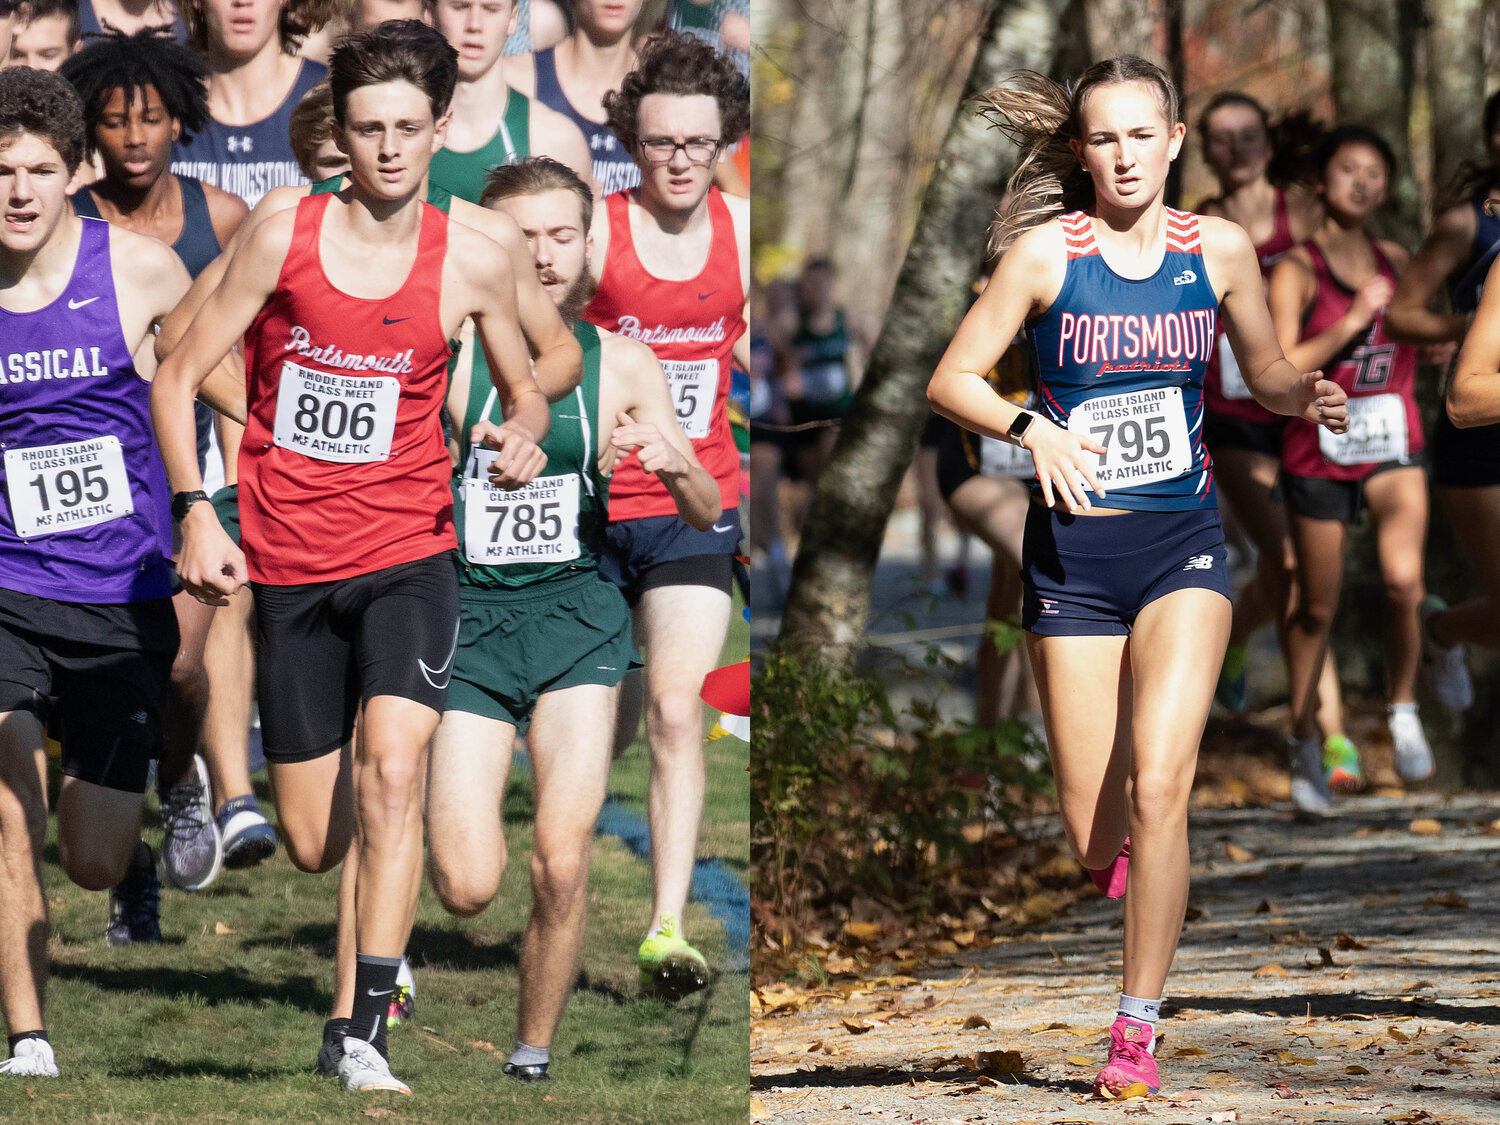 Sean Gray and Allie Kaull compete in the Class B Cross-Country Championship at Ponaganset High School on Oct. 28. They both qualified for the New England Championships this weekend.